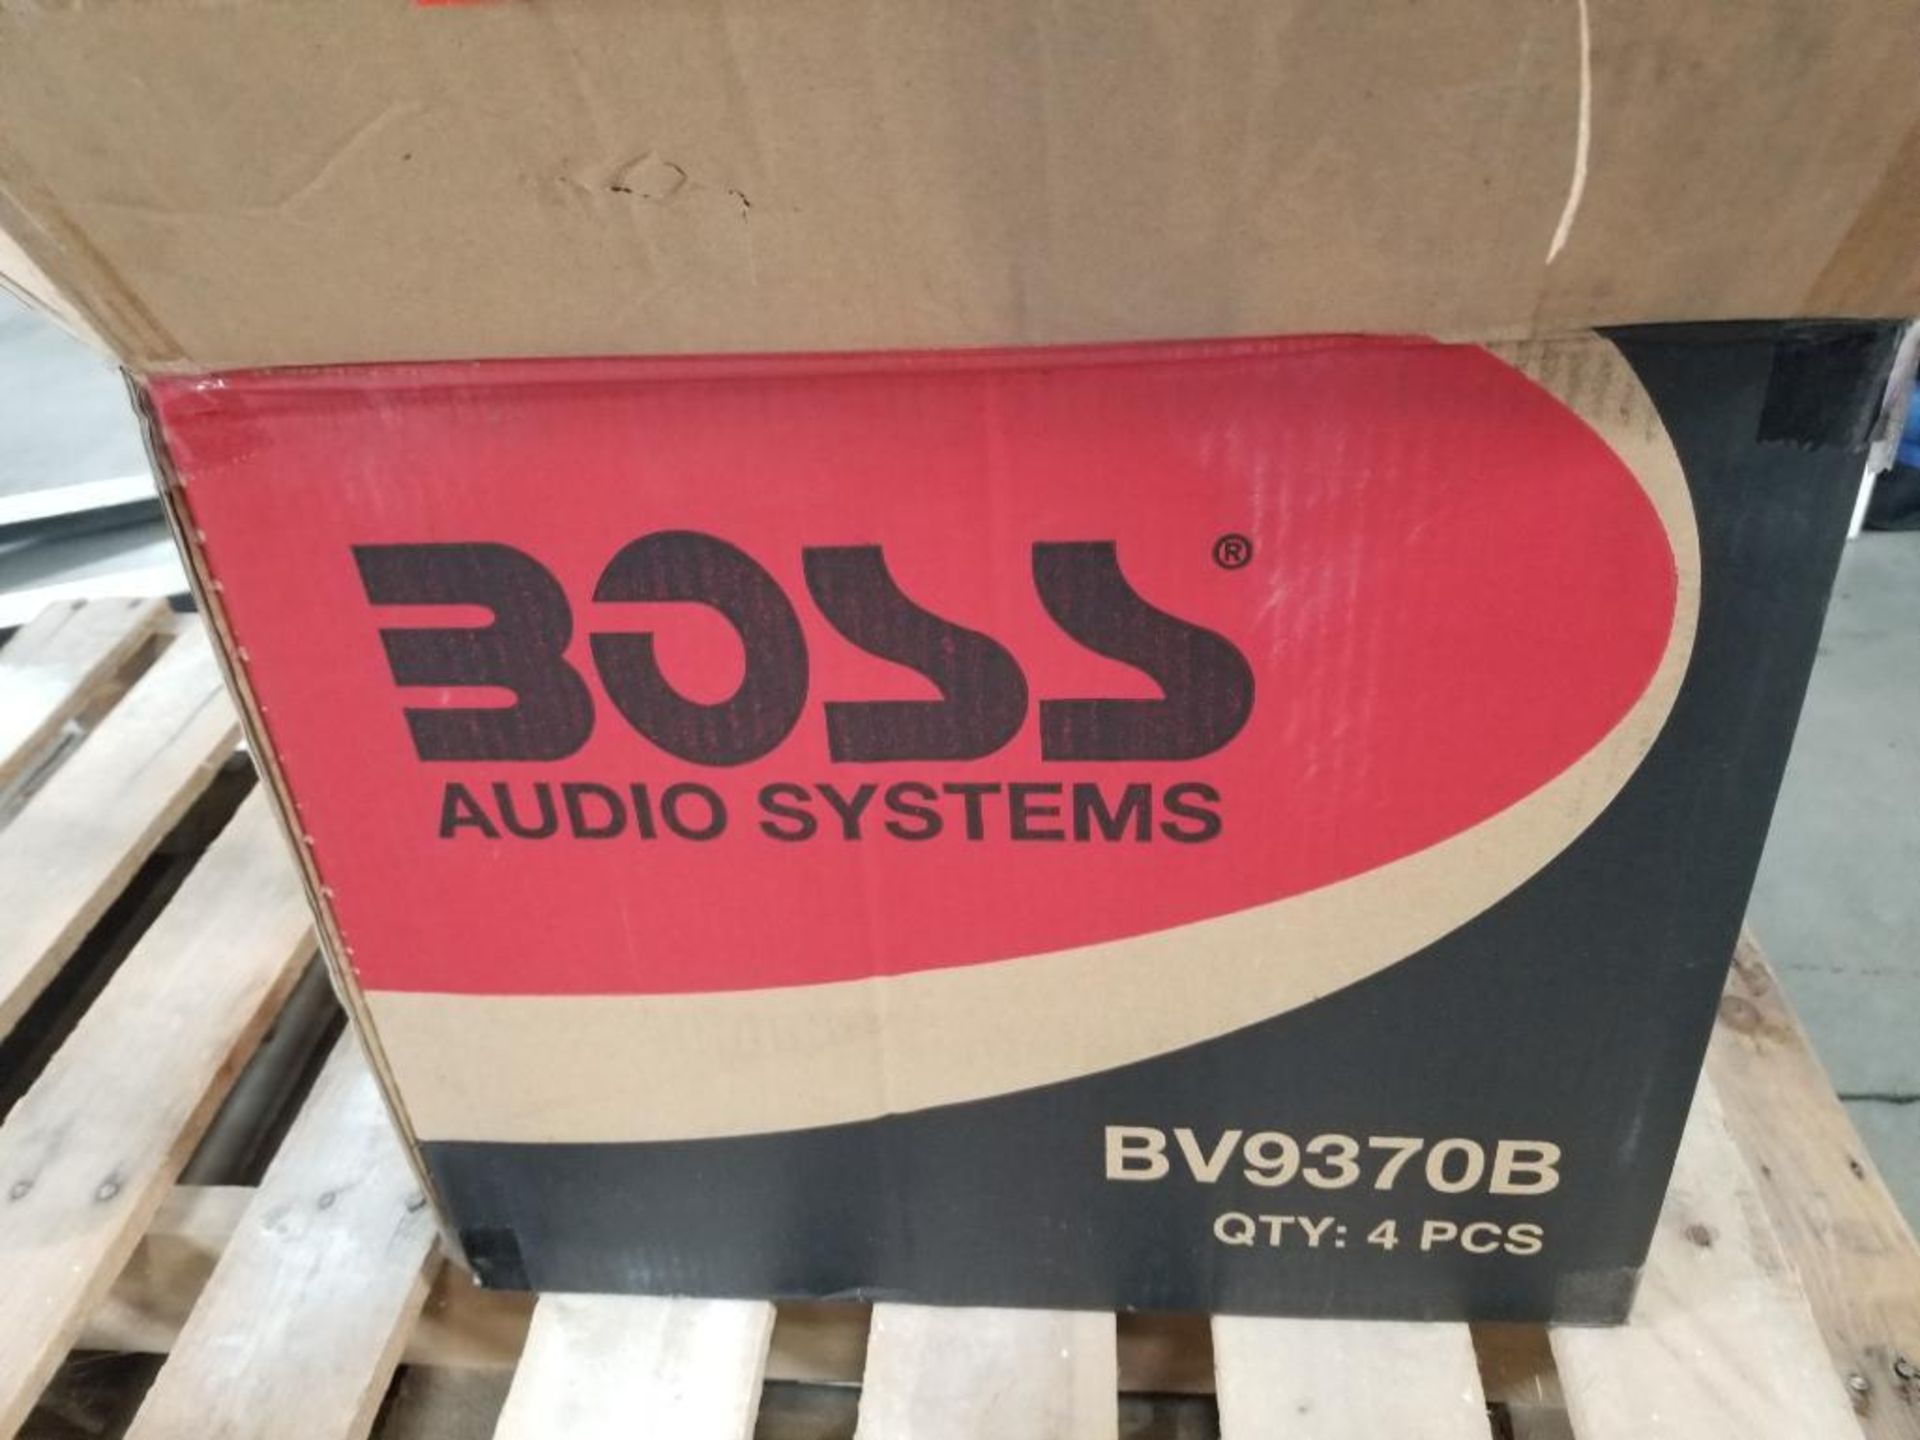 Qty 4 - BOSS Audio Systems BV9370B 320W, 4-channel, bluetooth, MP3 compatible digital media player. - Image 3 of 3